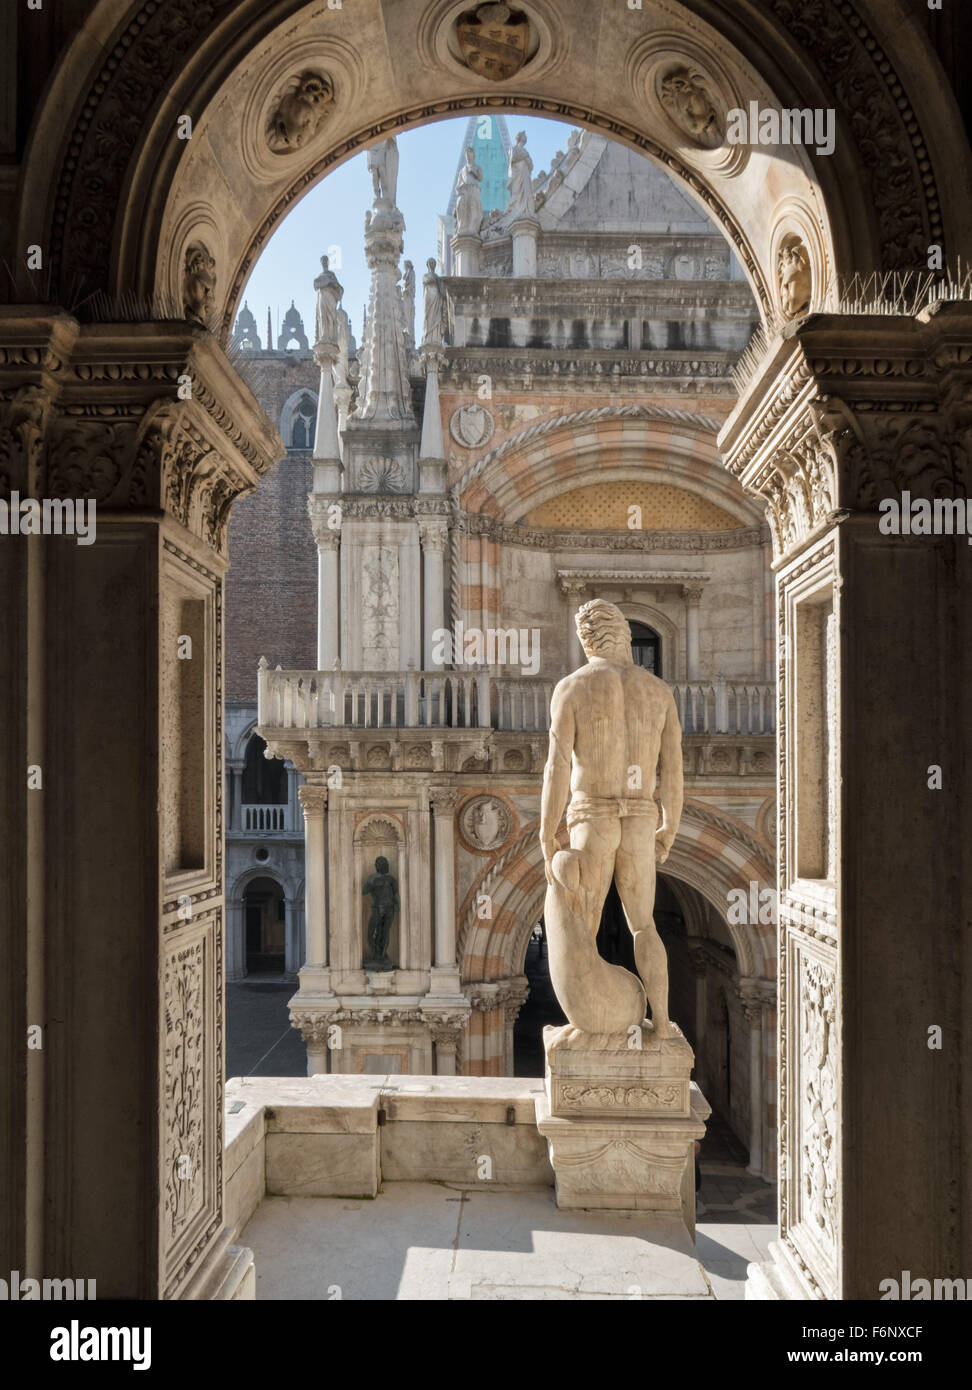 Details of the Grand Staircase in the courtyard of the Doge's Palace at St Marks Square, San Marco, Venice. Stock Photo